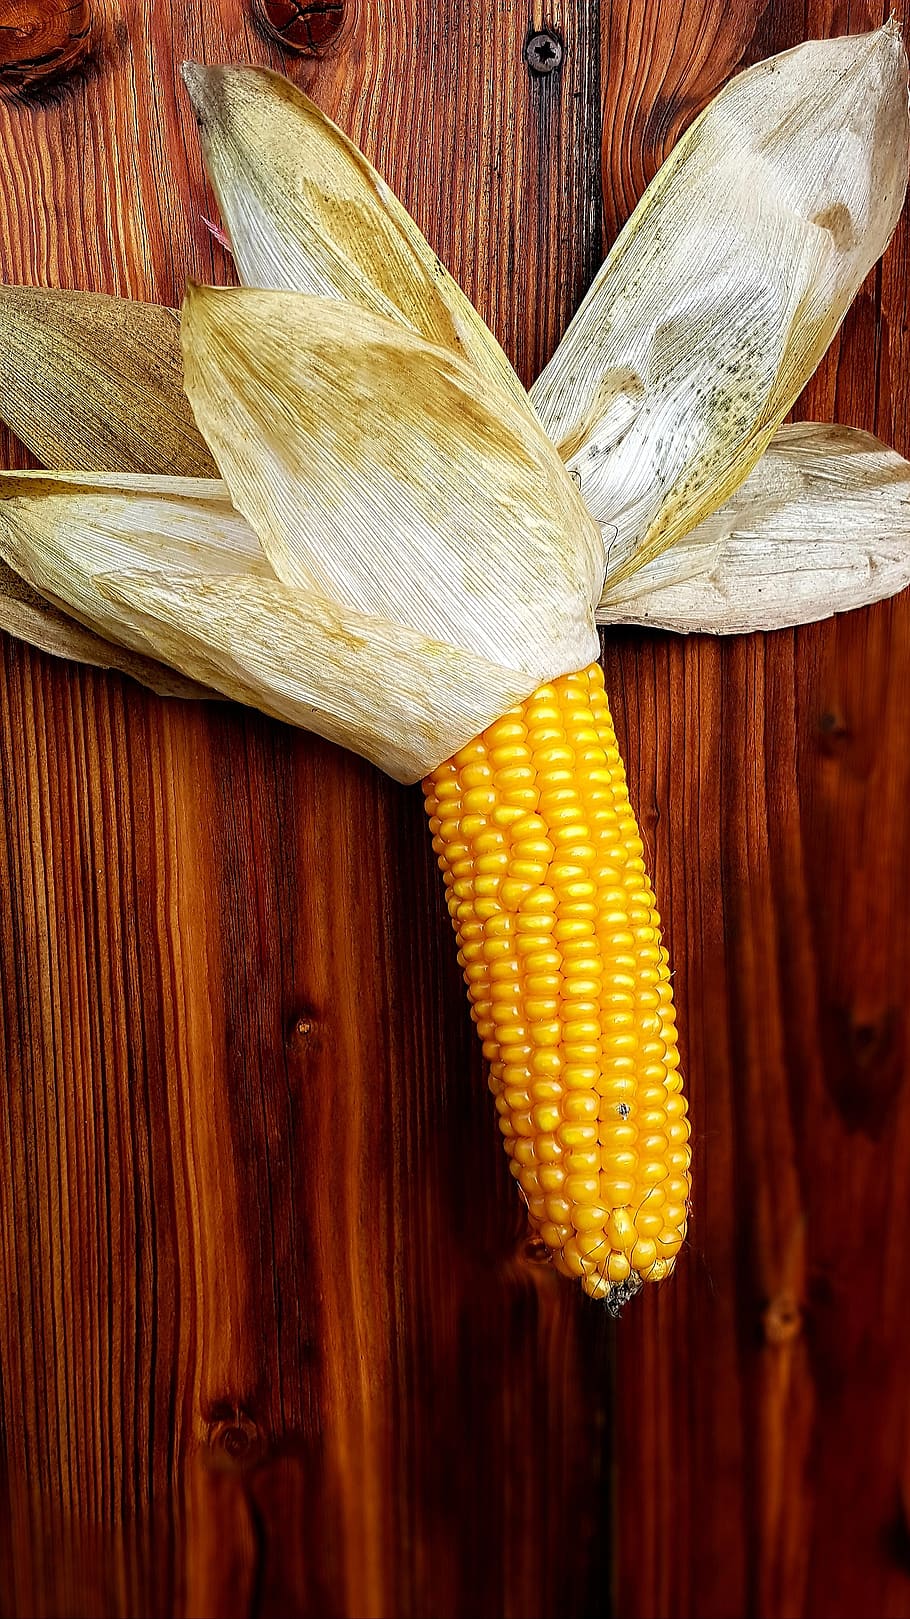 corn, corn on the cob, yellow, ripe, involucral bracts, wooden wall, food, food and drink, sweetcorn, vegetable